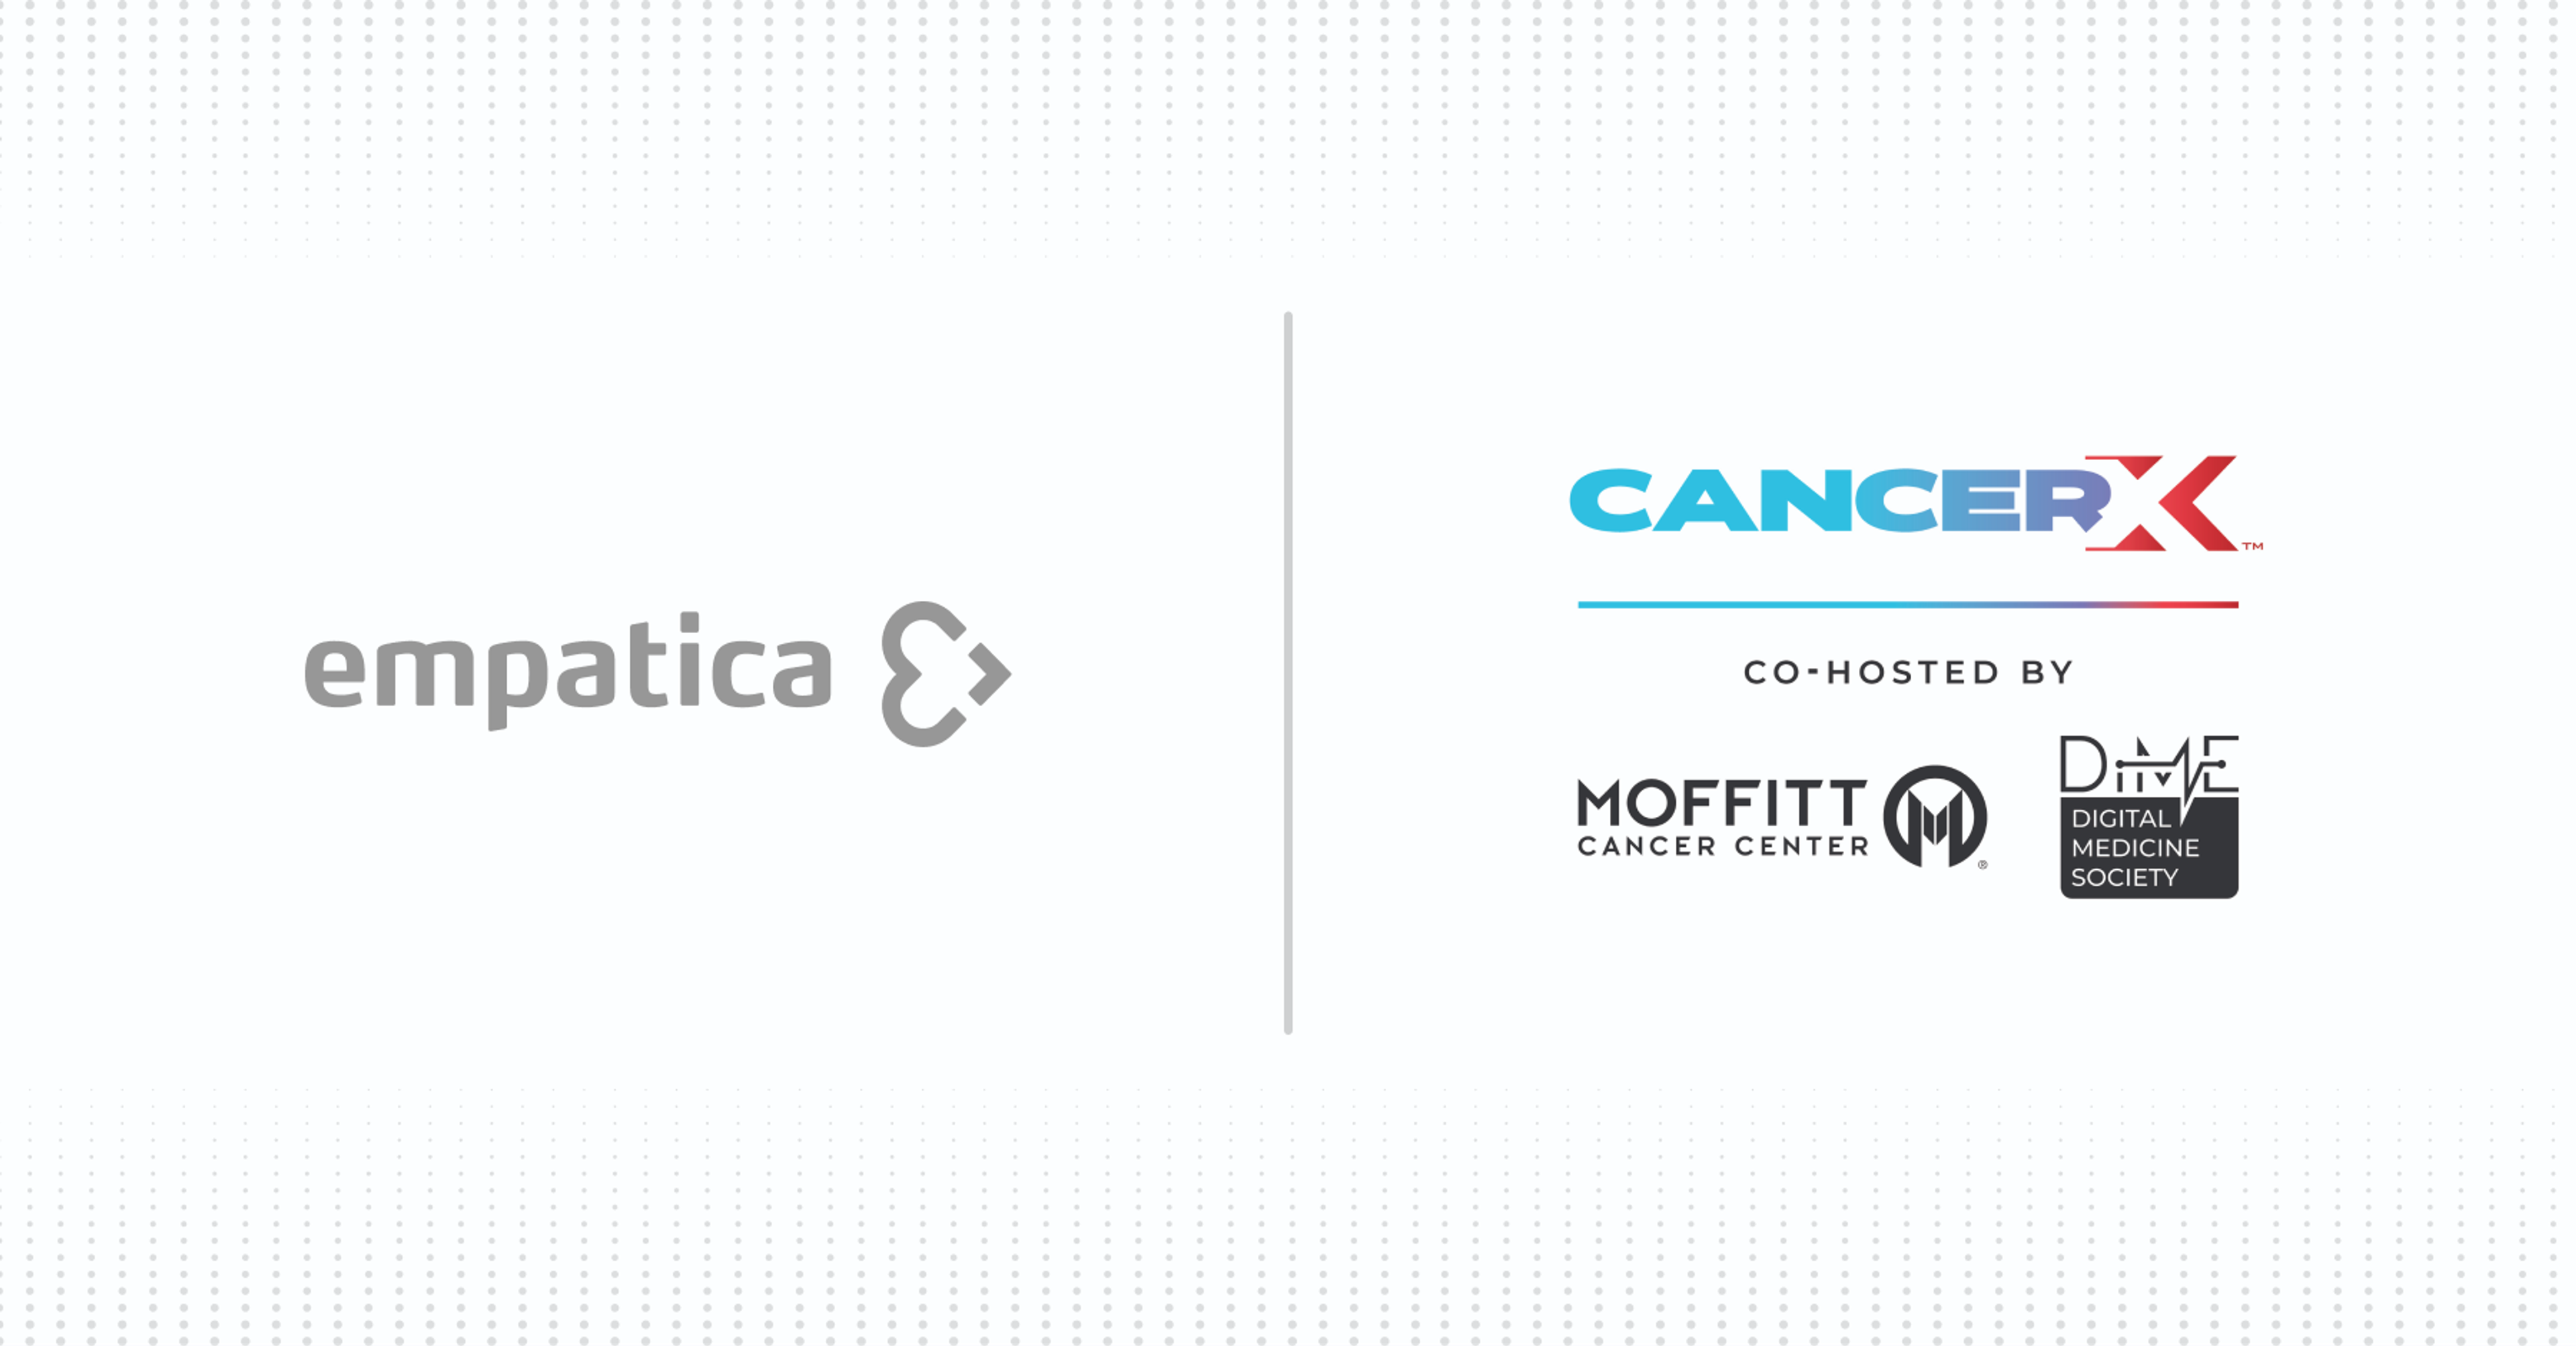 Empatica joins CancerX to help in the fight against cancer